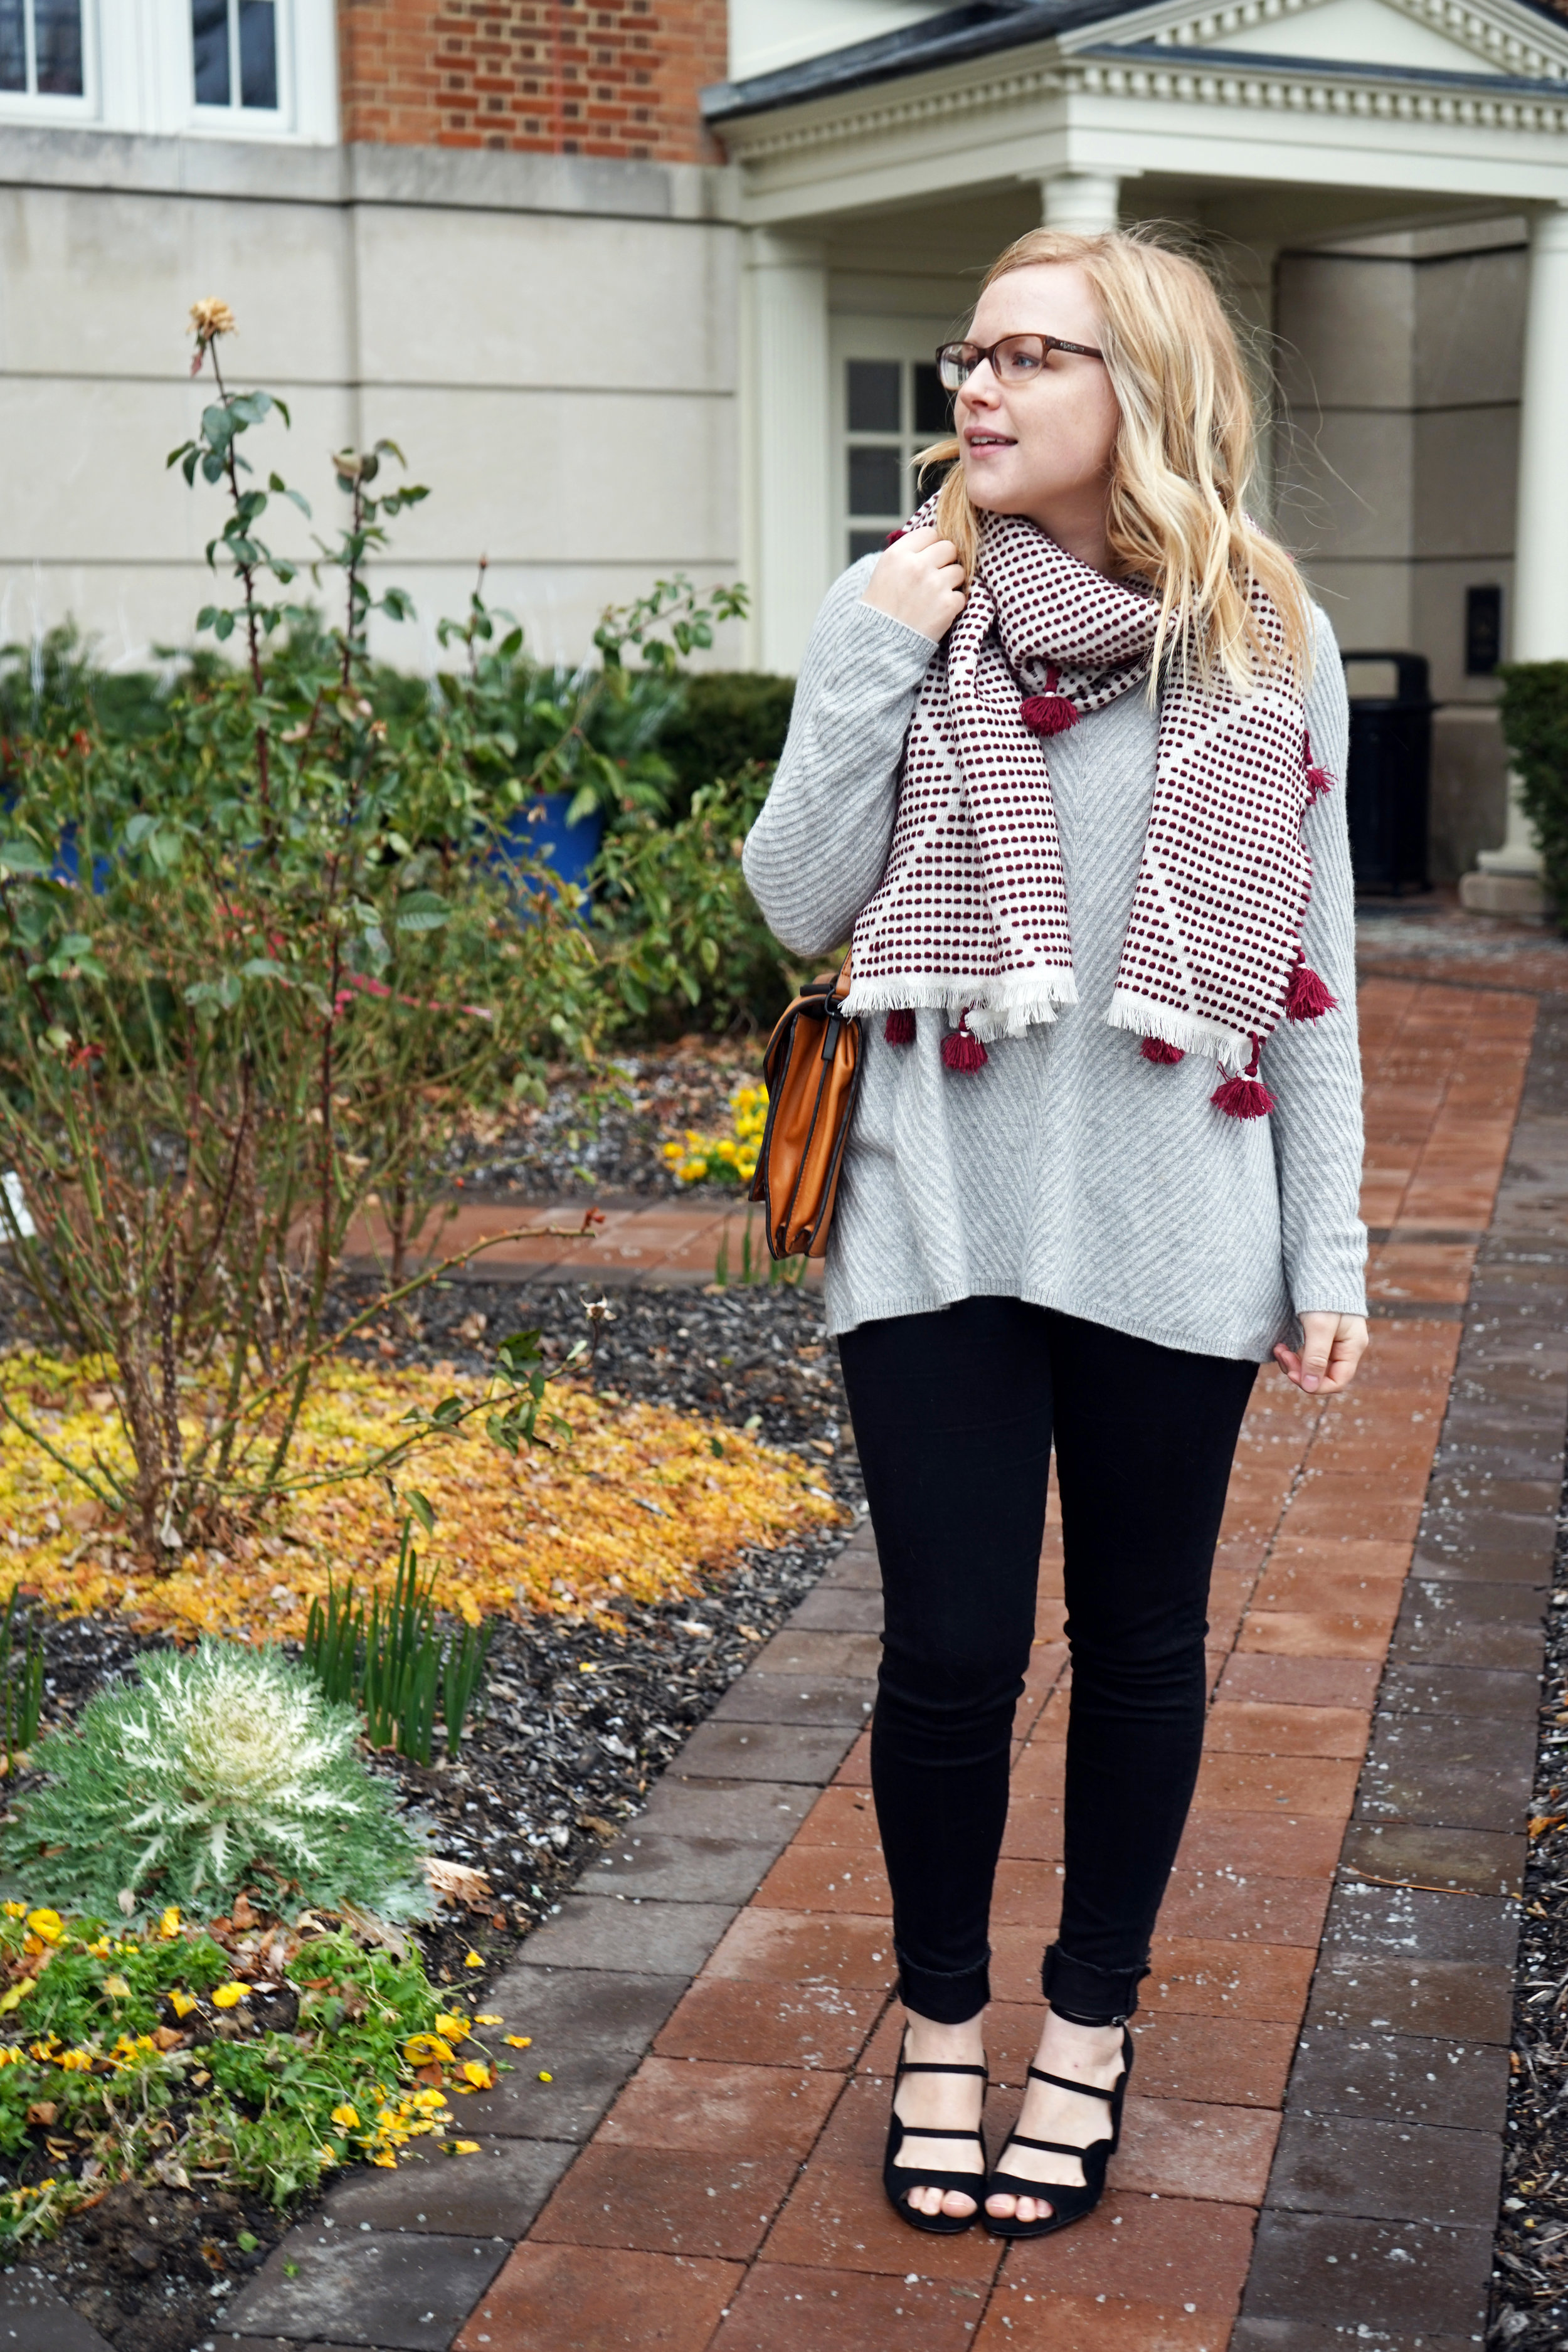 Maggie a la Mode - Madewell Diamond-Dash Tassel Scarf, Nordstrom Collection Chevron Cashmere Sweater, AG High-Waisted Skinny Jeans, Ann Taylor Ashton Suede Scalloped Heels, Loeffler Randall Rider Bag